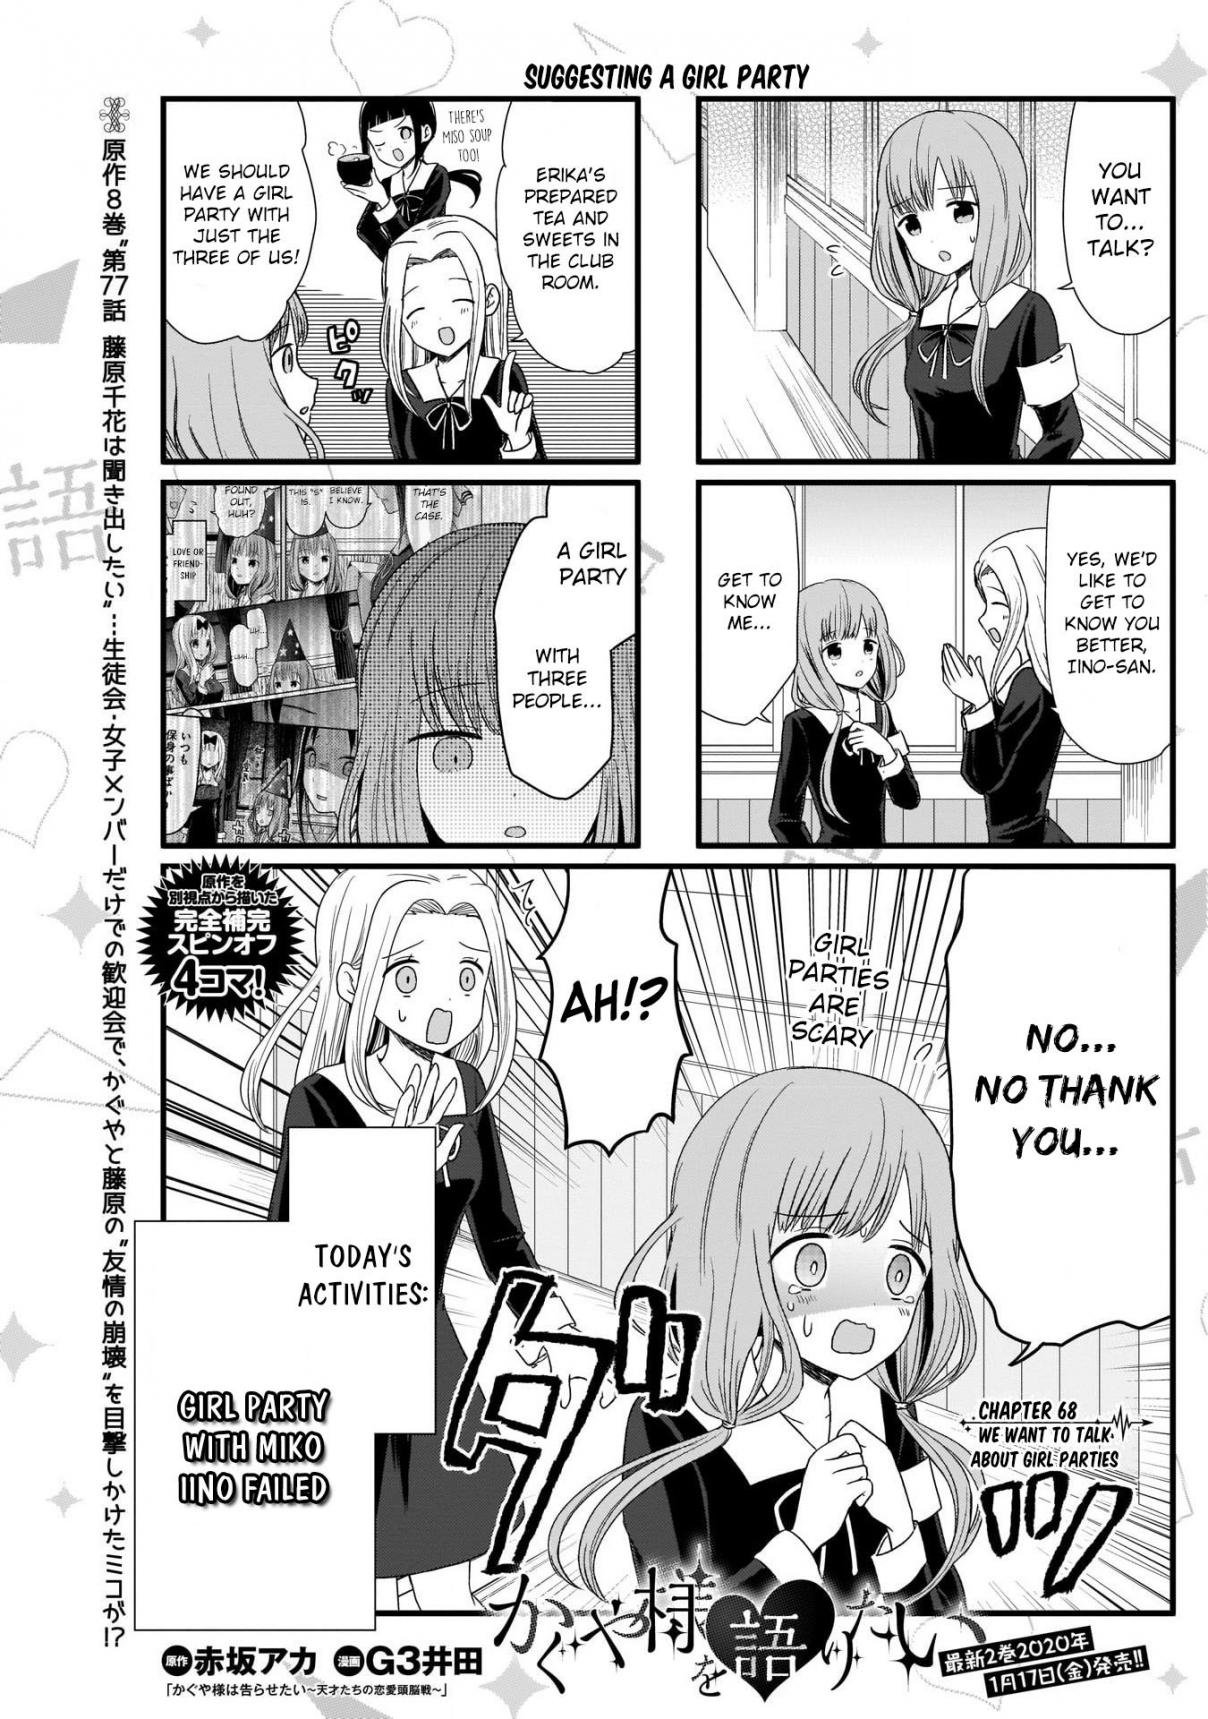 We Want To Talk About Kaguya Ch. 68 we want to talk about girl parties